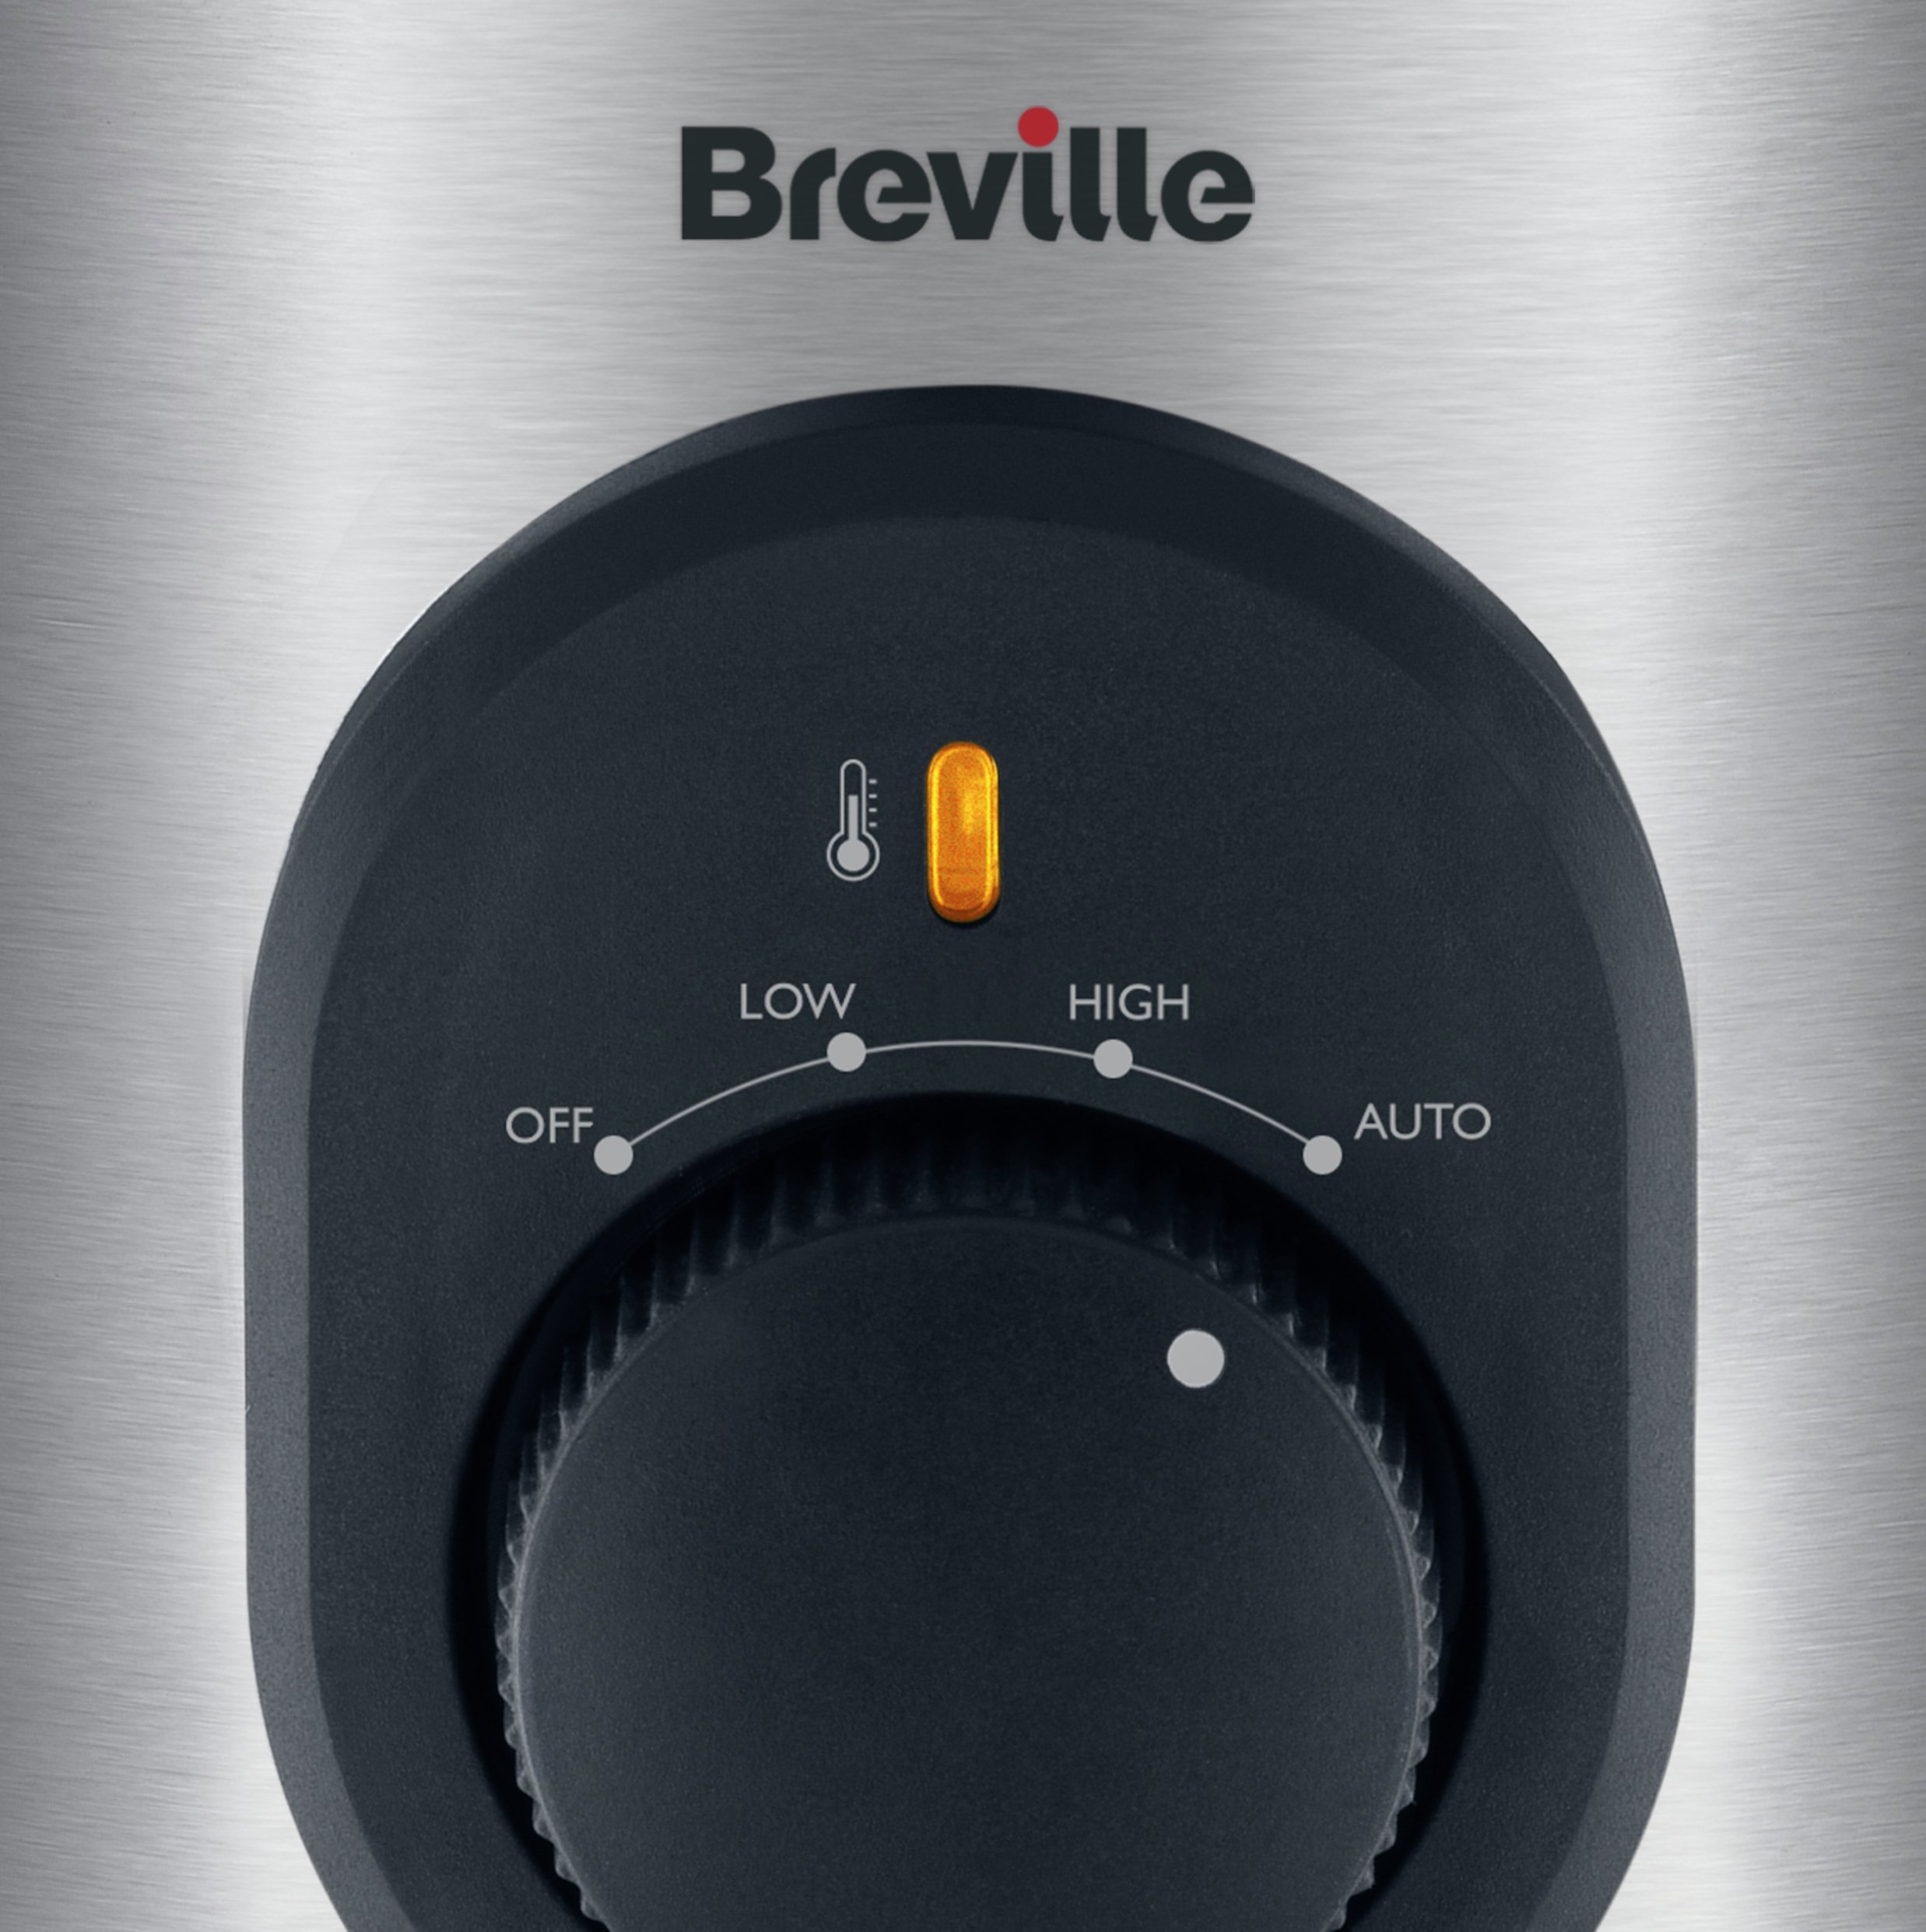 Breville 1.5L Compact Slow Cooker Review